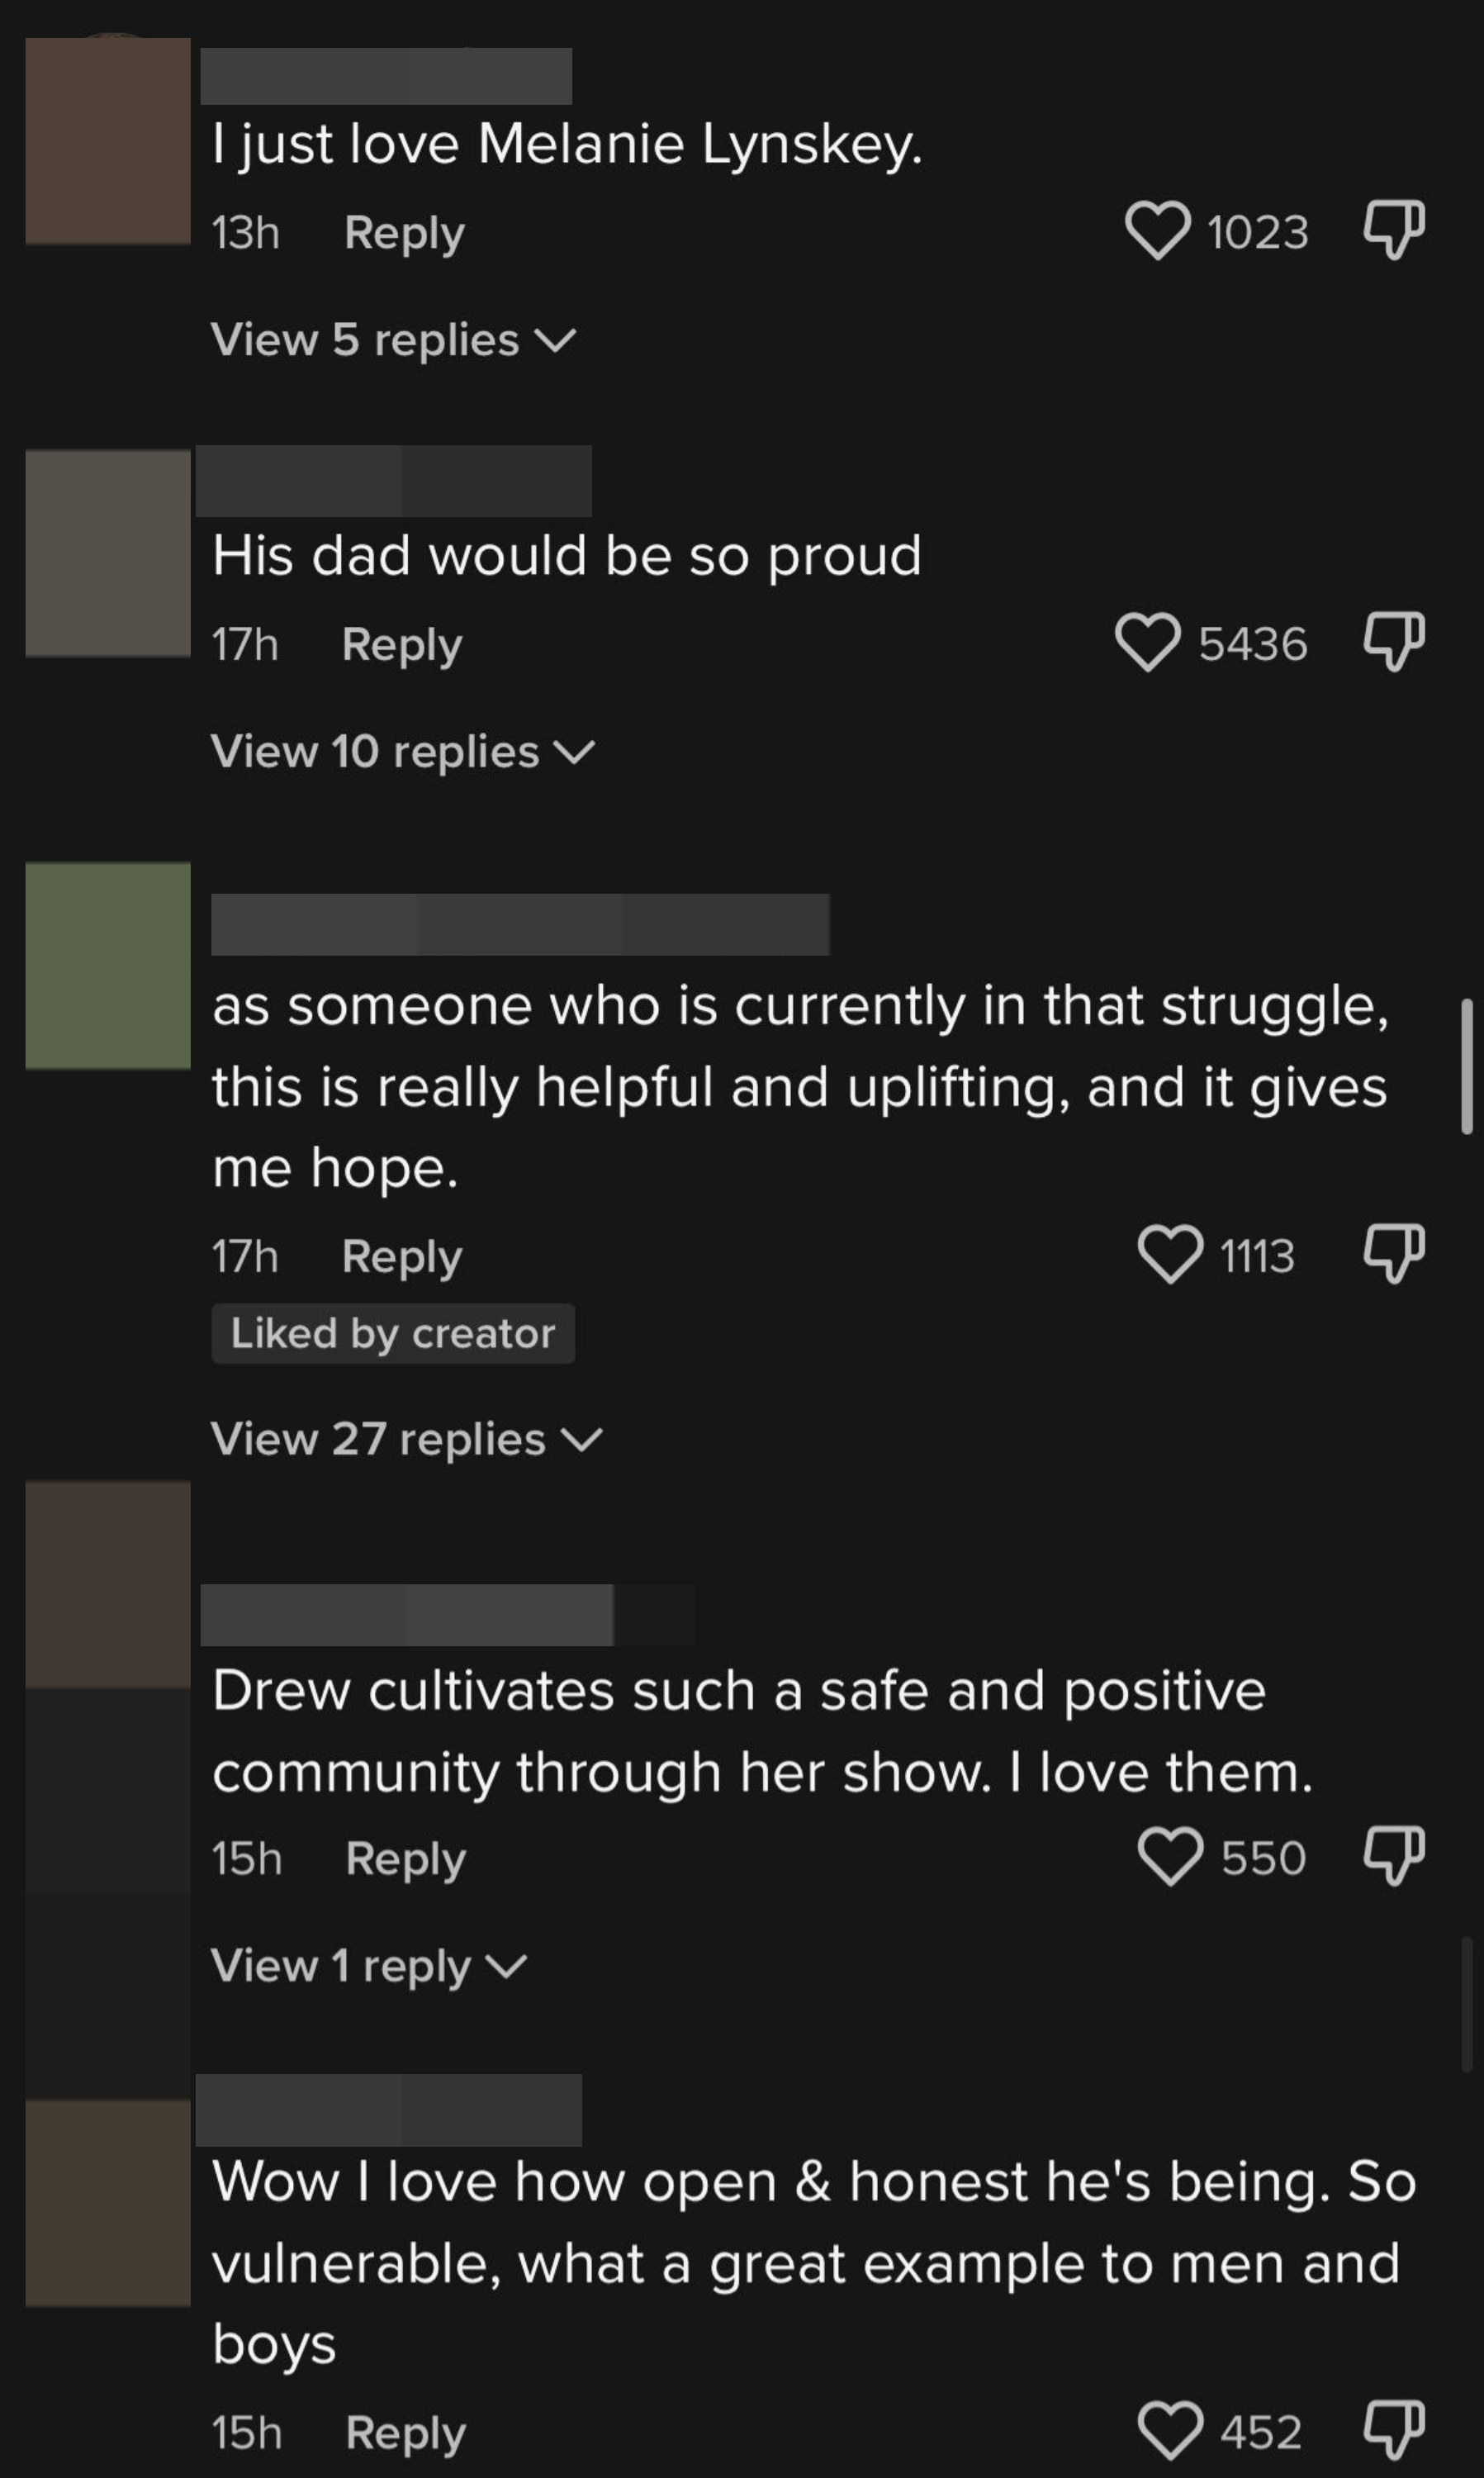 Comments including &quot;His dad would be so proud,&quot; &quot;Drew cultivates such a safe and positive community through her show,&quot; and &quot;I love how open and honest he&#x27;s being&quot;